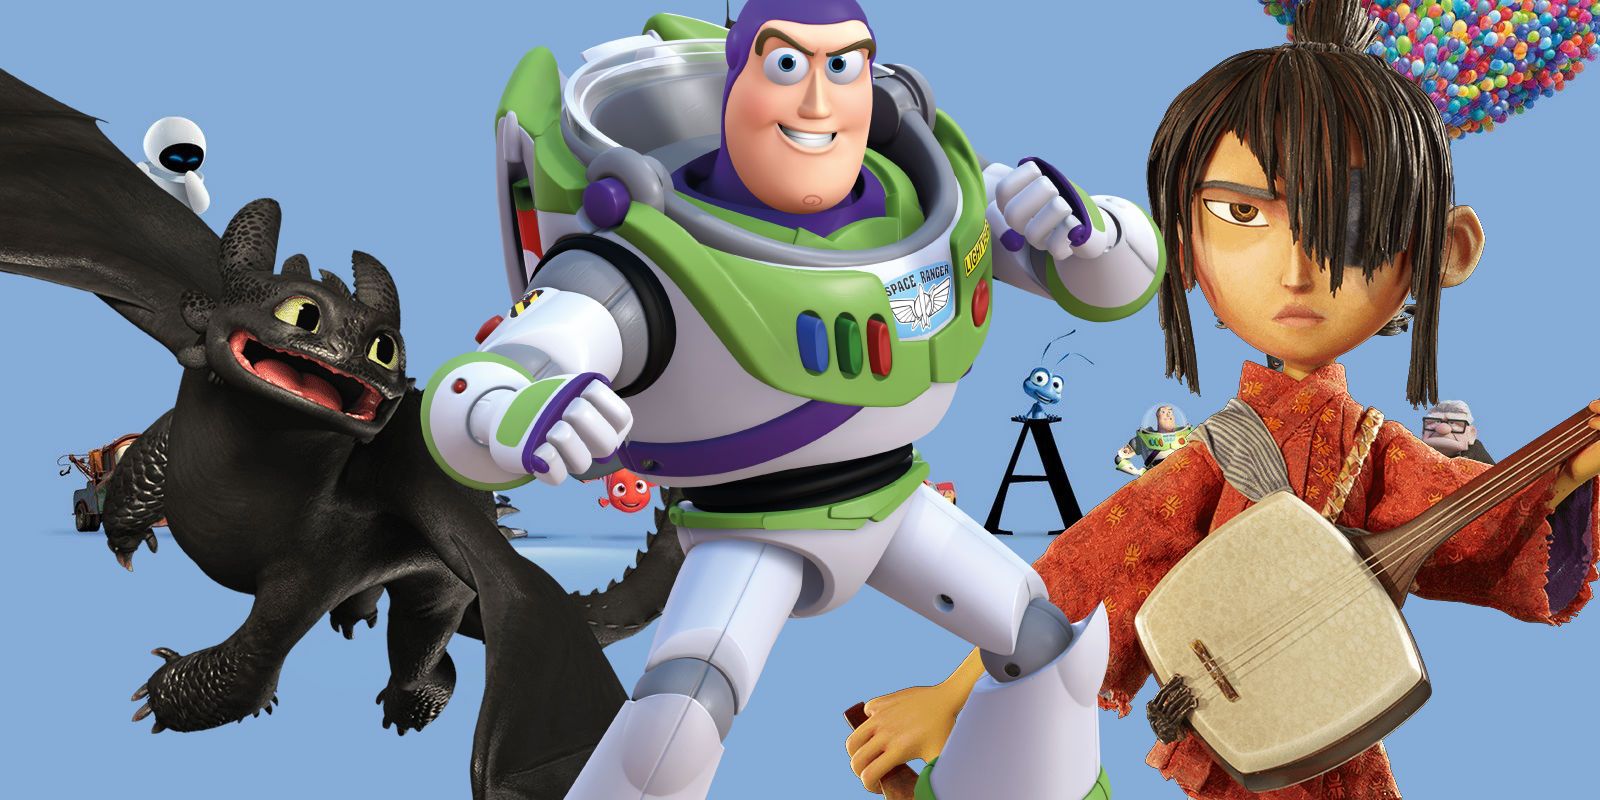 Pixar Logo Buzz Lightyear Kubo and Toothless How To Train Your Dragon